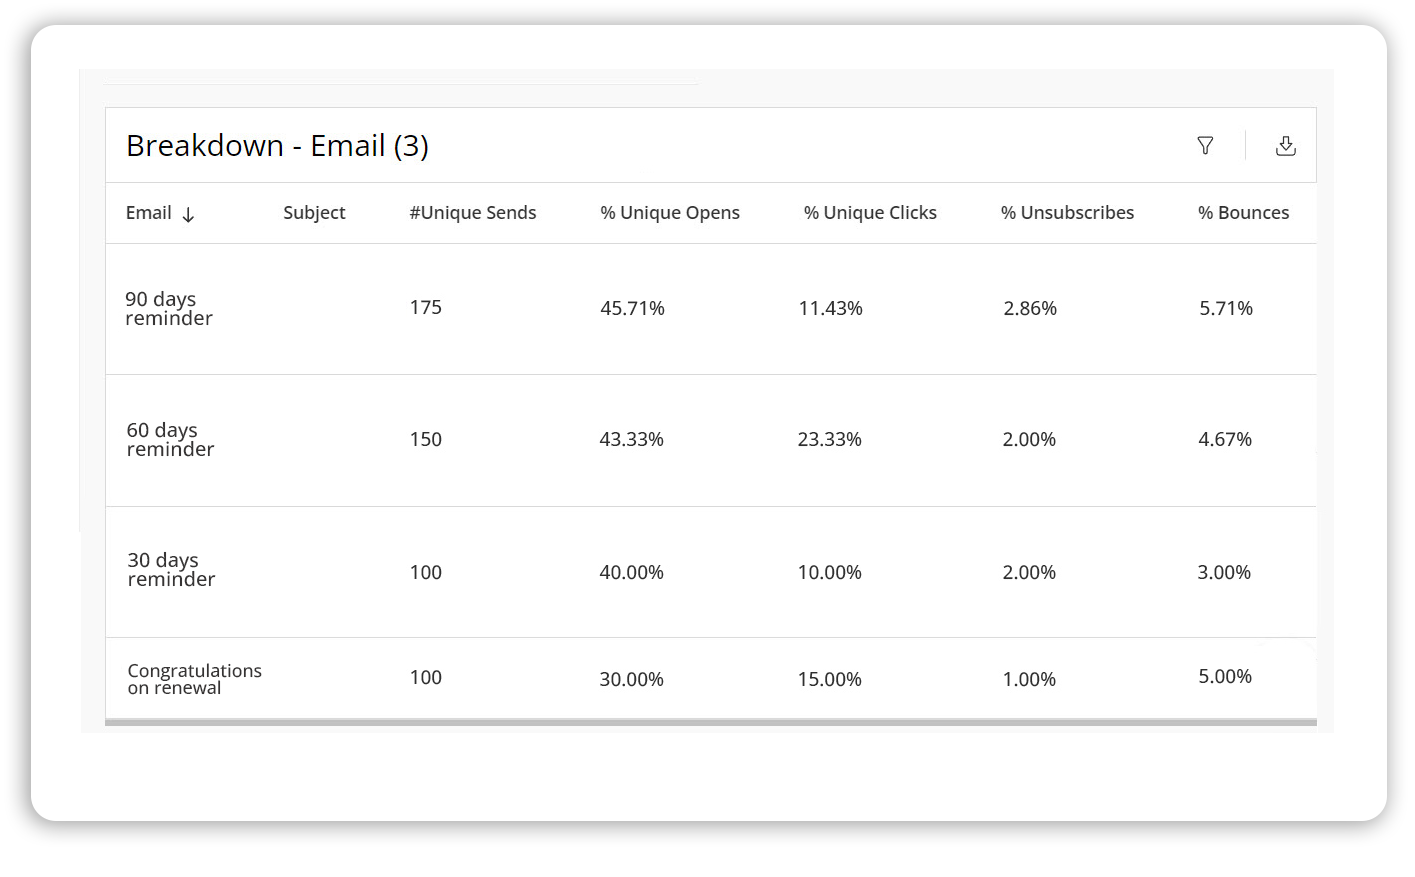 Breakdown by email reports 